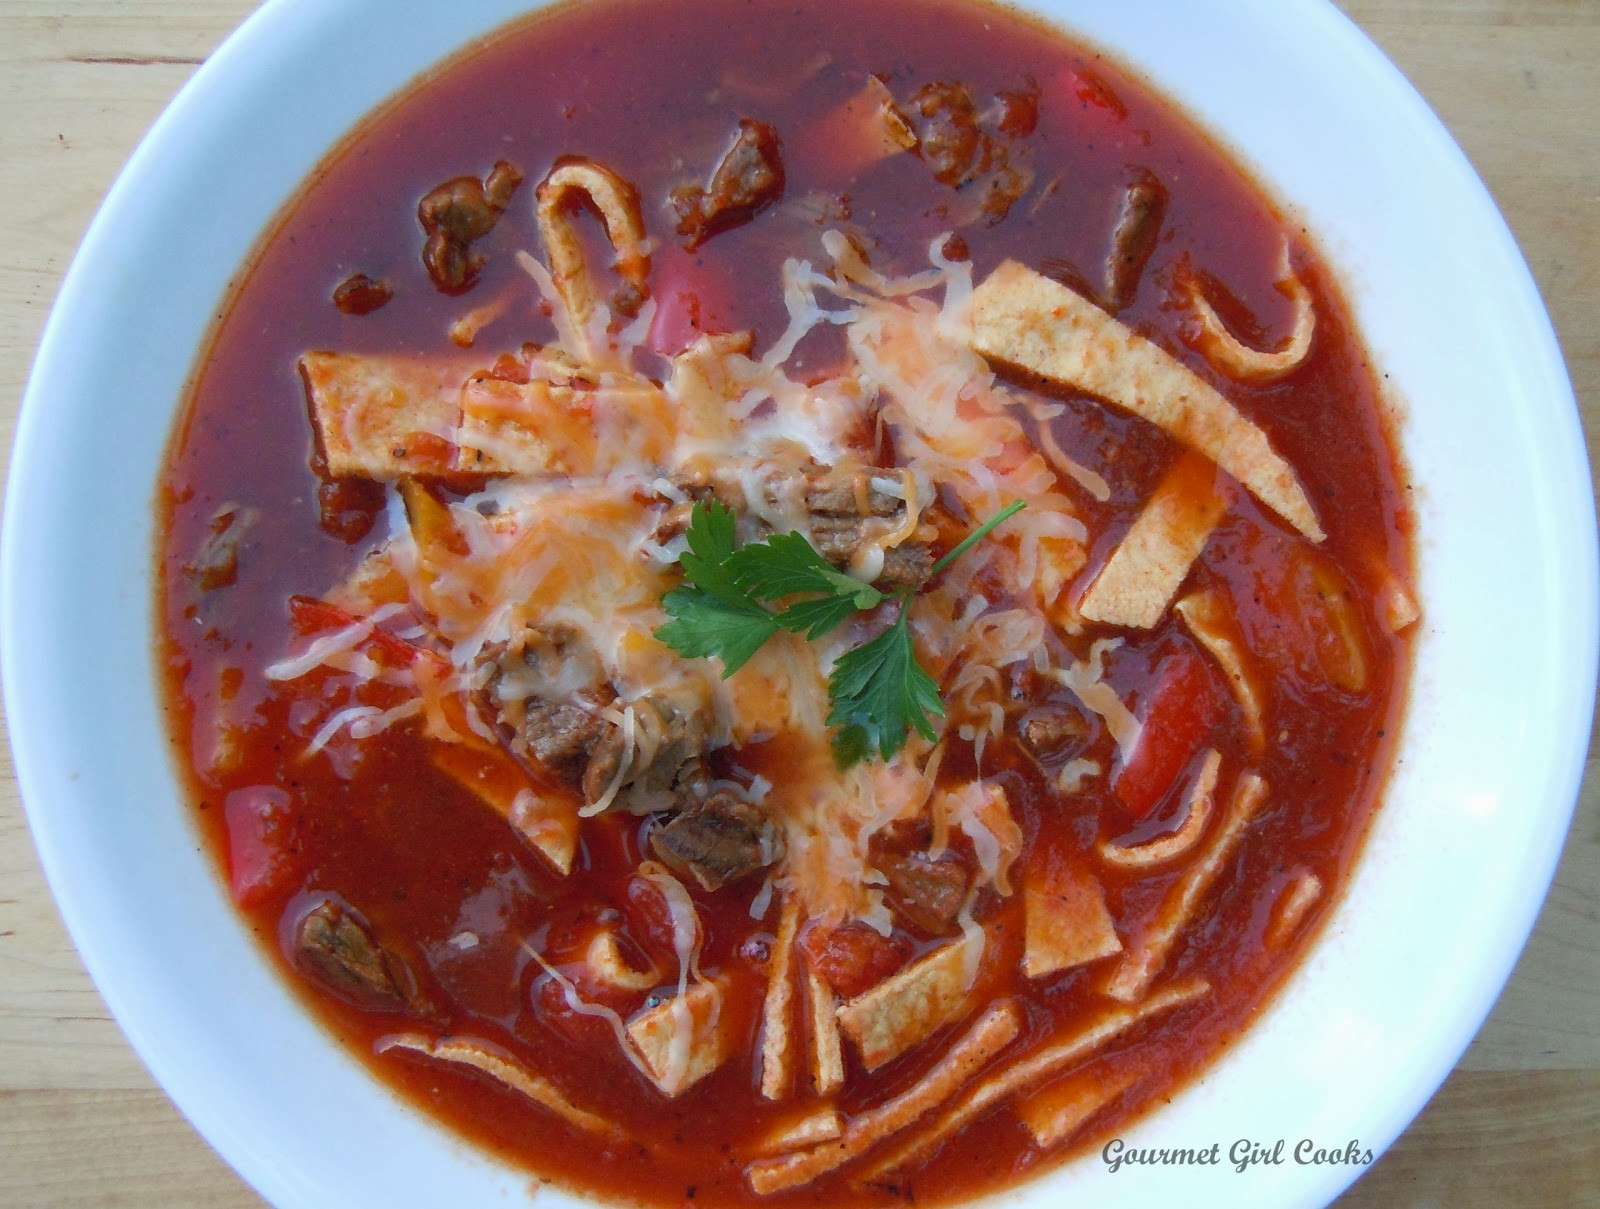 Gourmet Mexican Recipes
 Gourmet Girl Cooks Mexican Style Beef & Tortilla Noodle Soup